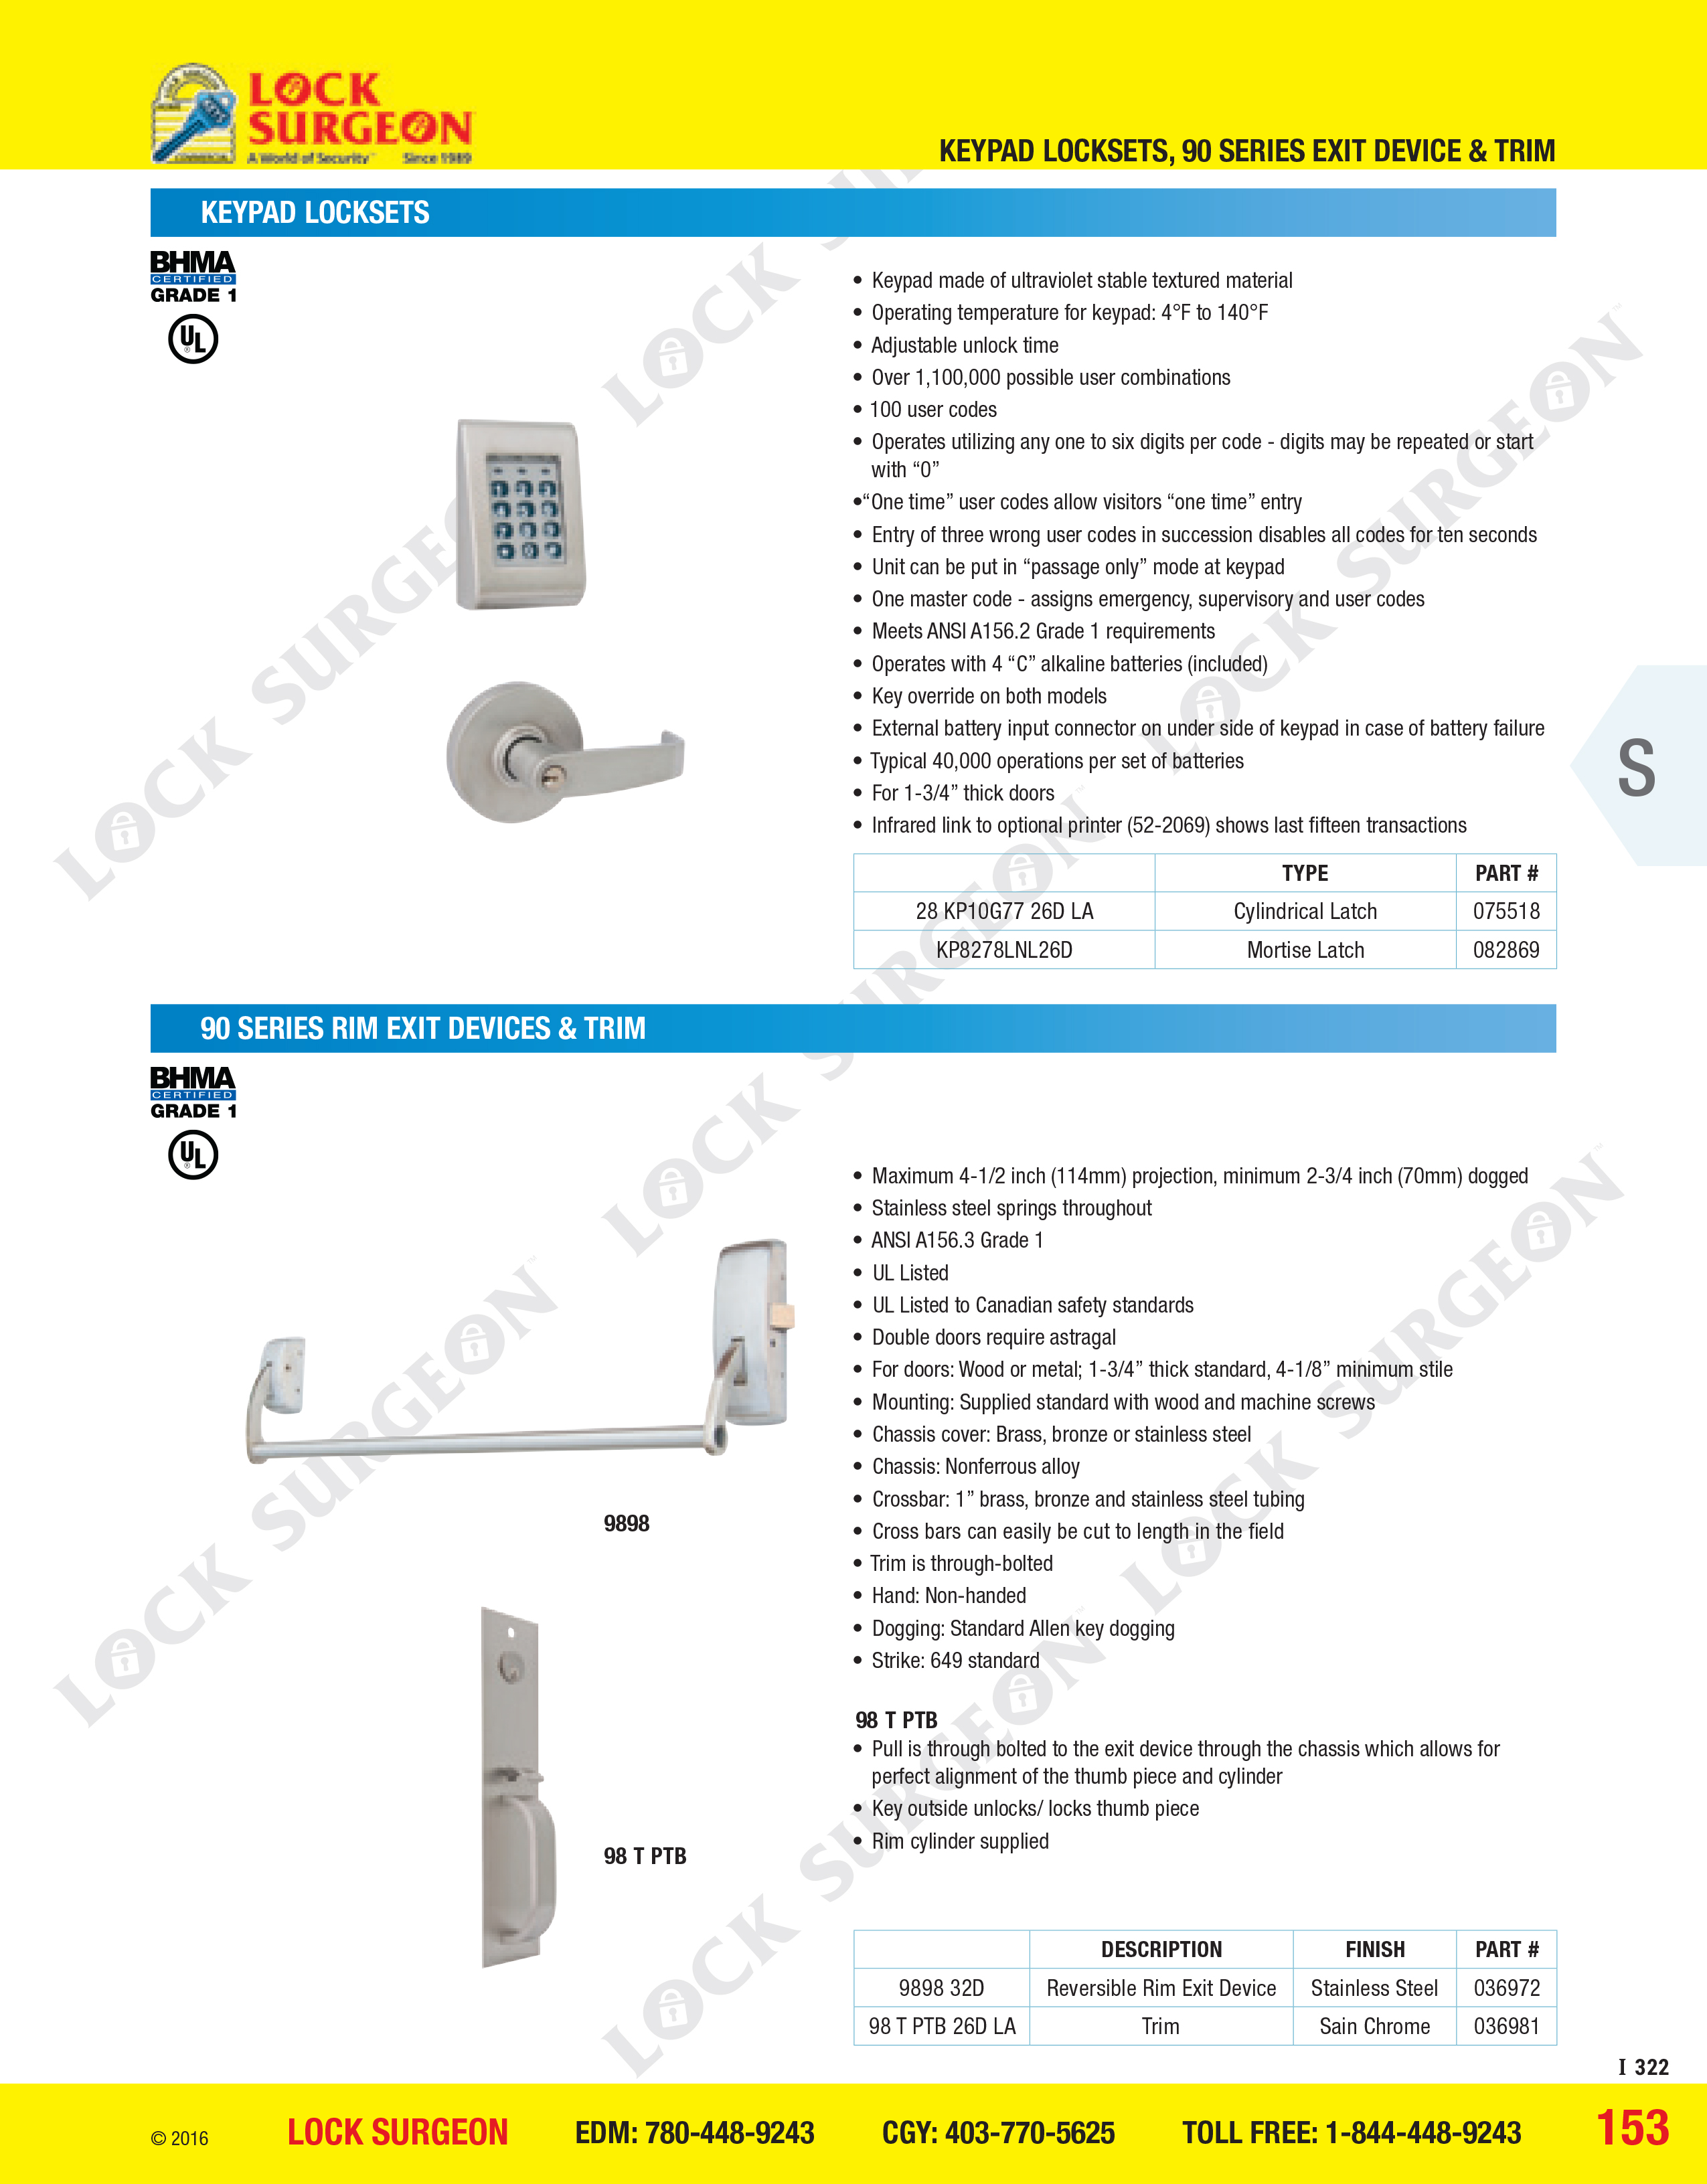 Acheson Sargent keypad locks and 90-series rim-exit device and trims.